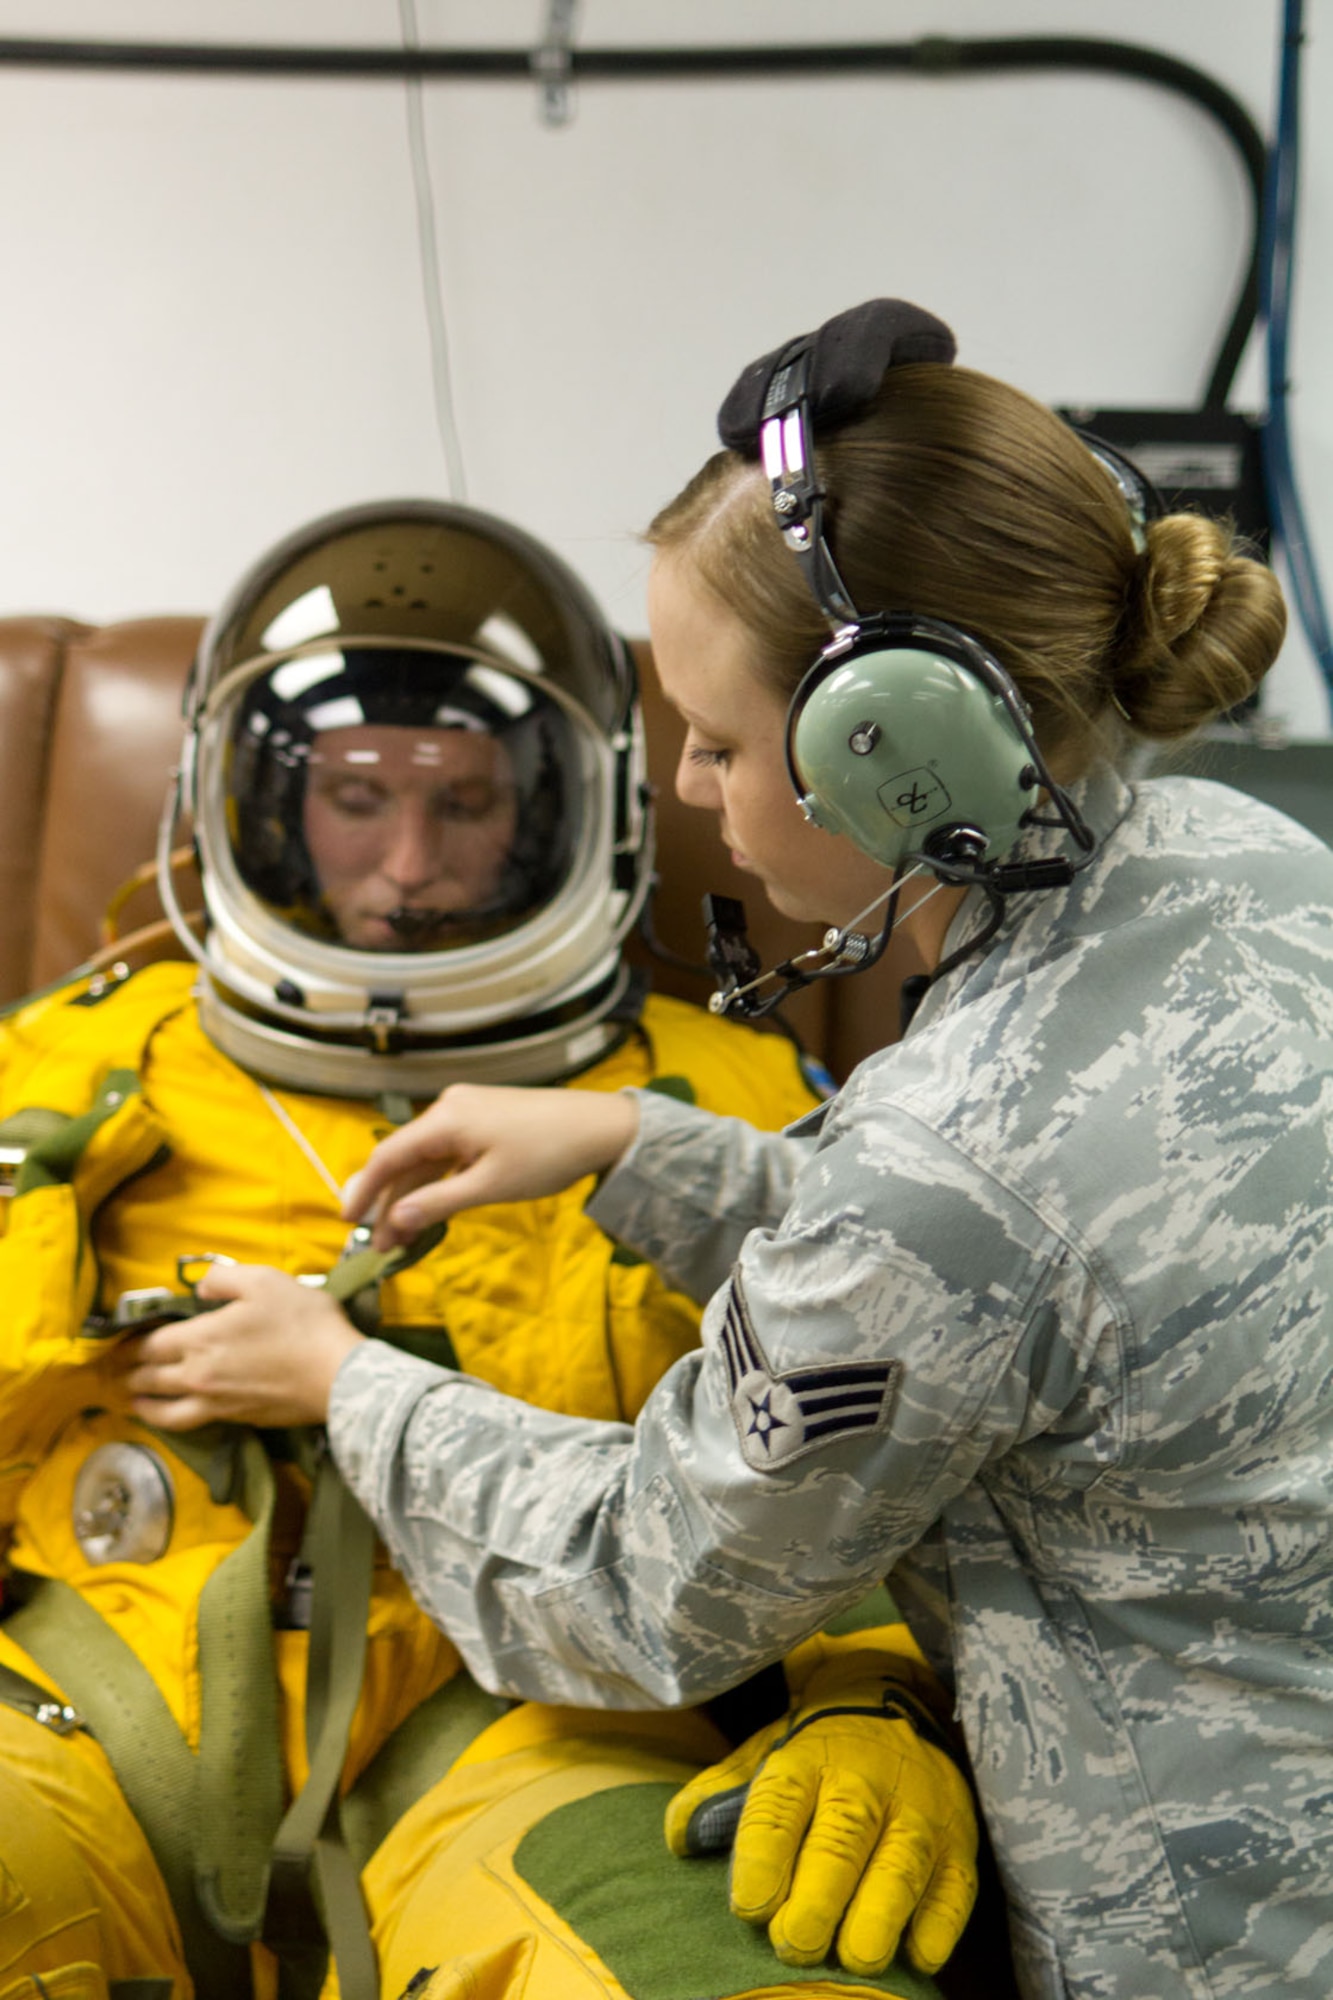 SOUTHWEST ASIA - U.S. Air Force Senior Airman Cortney Reeb, 99th Expeditionary Reconnaissance Squadron physiology support detachment technician, checks the air pressure valve on the full-pressure suit of Capt. Peter, 99th ERS U-2 pilot, July 17, 2012. Home based at Beale Air Force Base, Calif., U-2 pilots and support personnel are often rotated to operational detachments worldwide. (U.S. Air Force photo/Senior Airman Alexander Recupero)